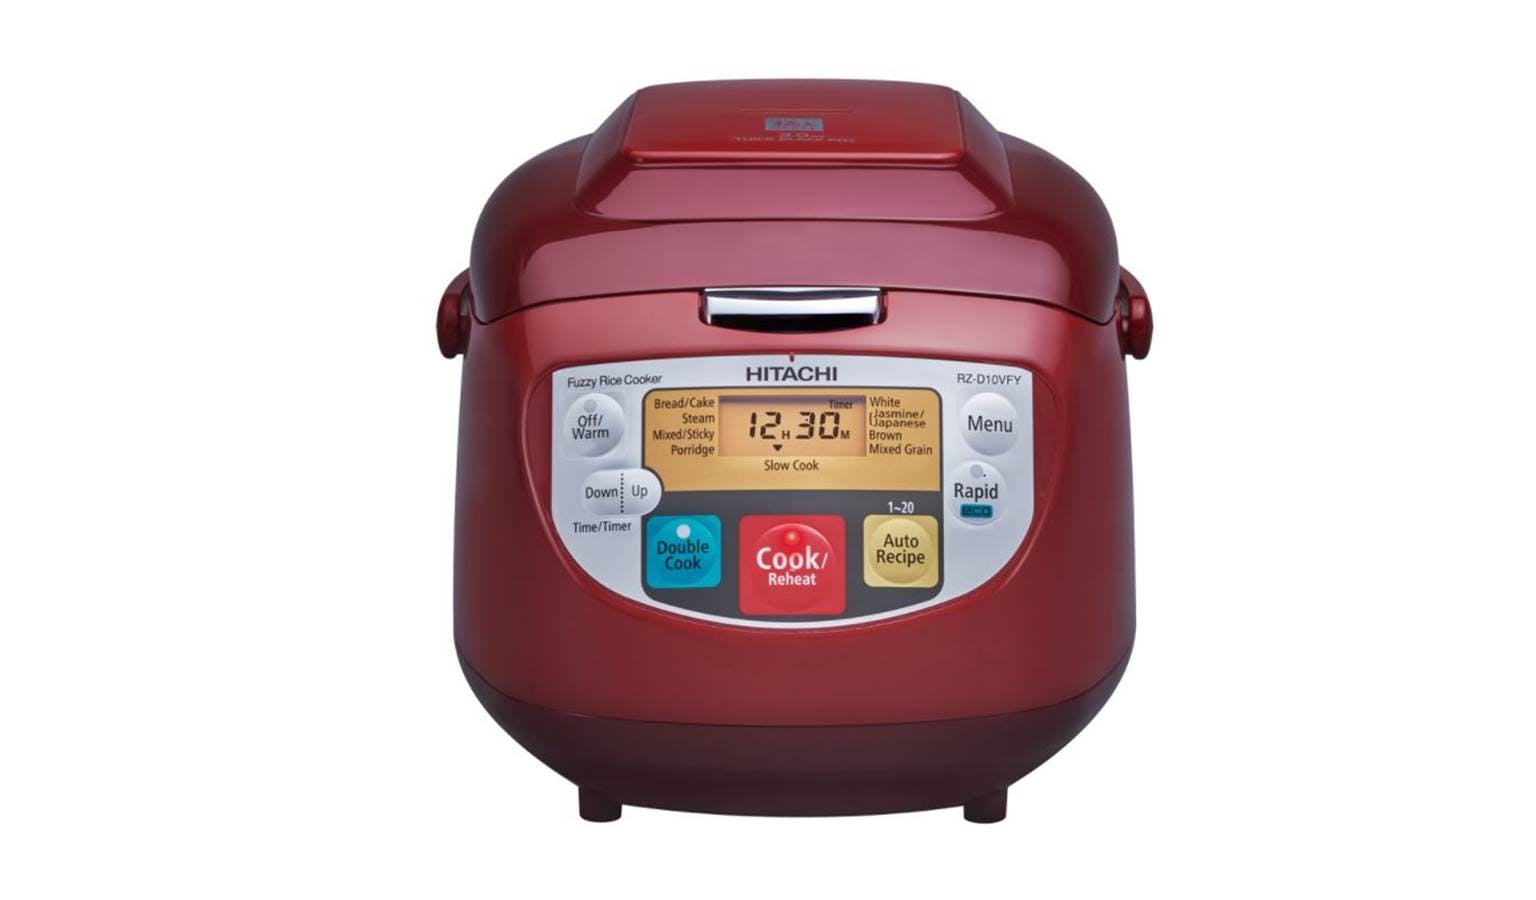 https://hnsgsfp.imgix.net/4/images/detailed/32/Hitachi_Microcomputer_Rice_Cooker_-_Red_1.0L_(Main).JPG?fit=fill&bg=0FFF&w=1536&h=900&auto=format,compress